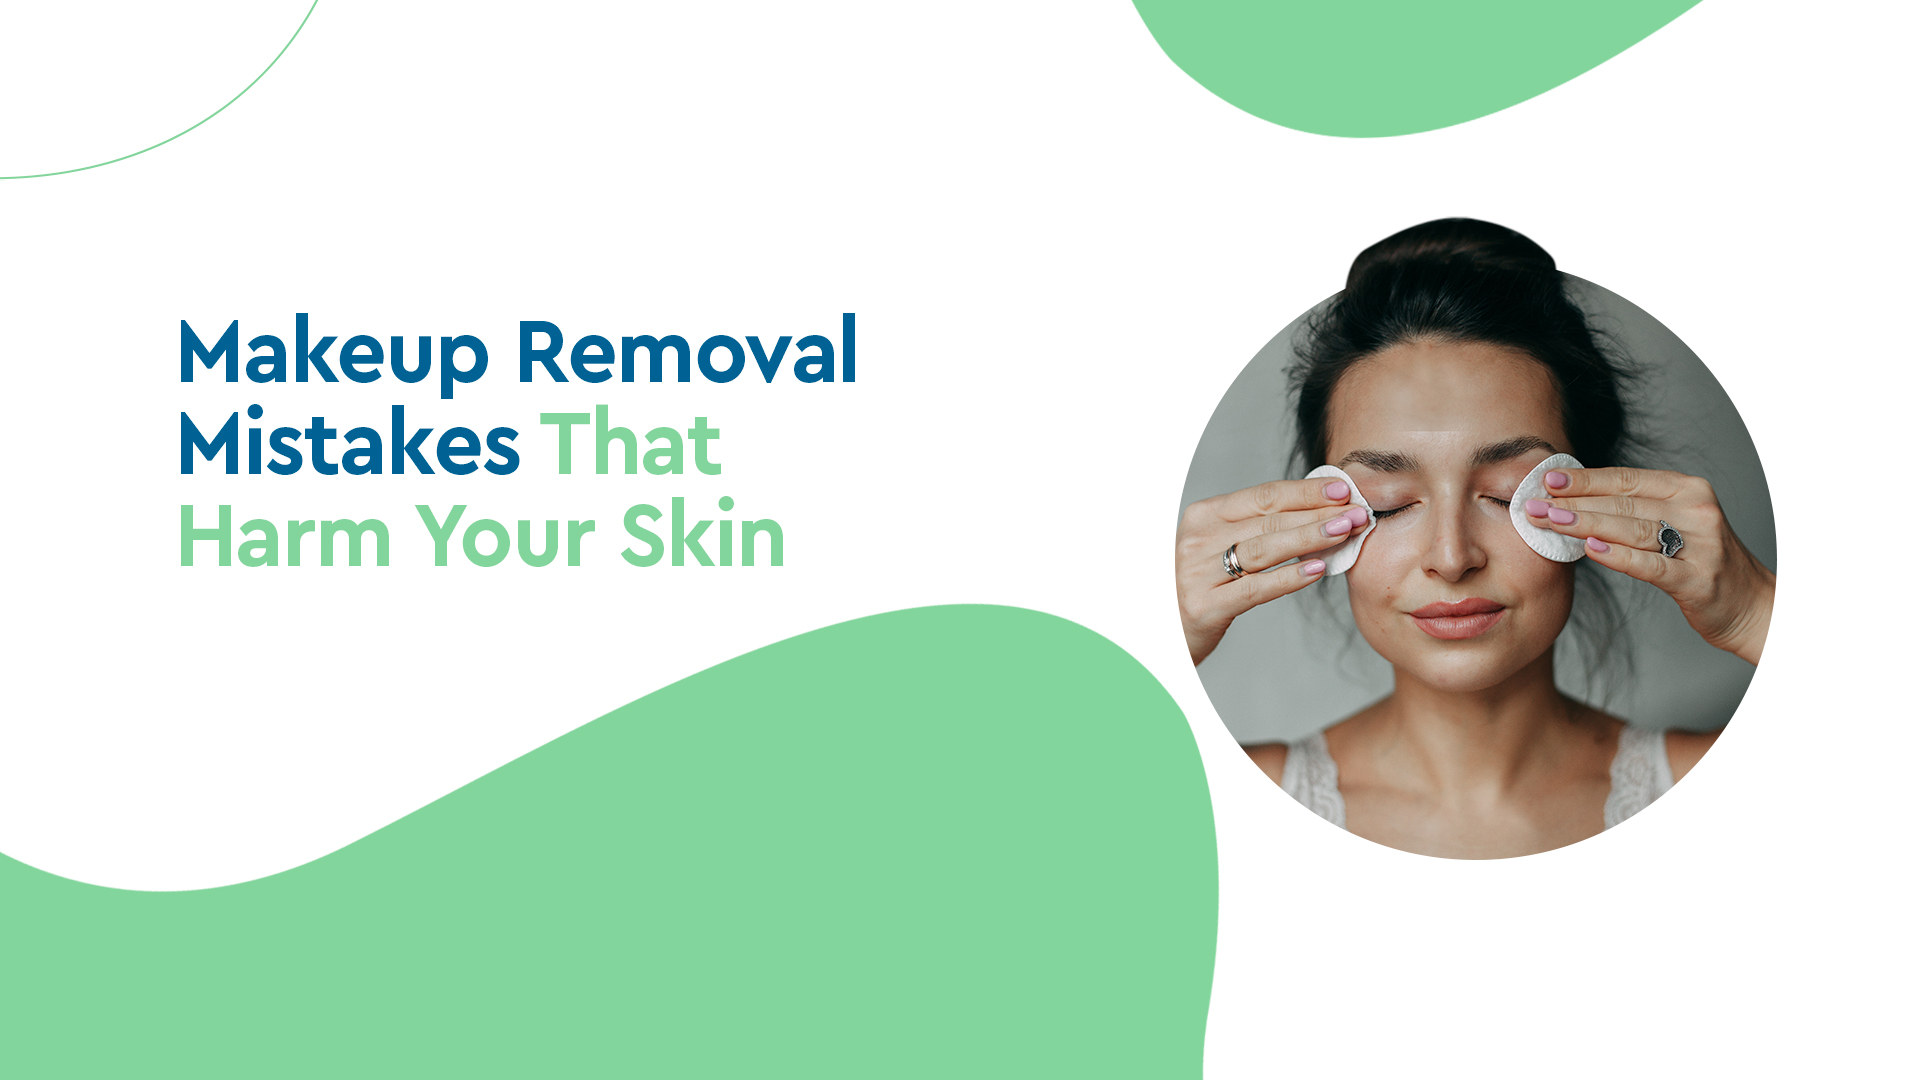 Makeup Removal Mistakes That Harm Your Skin